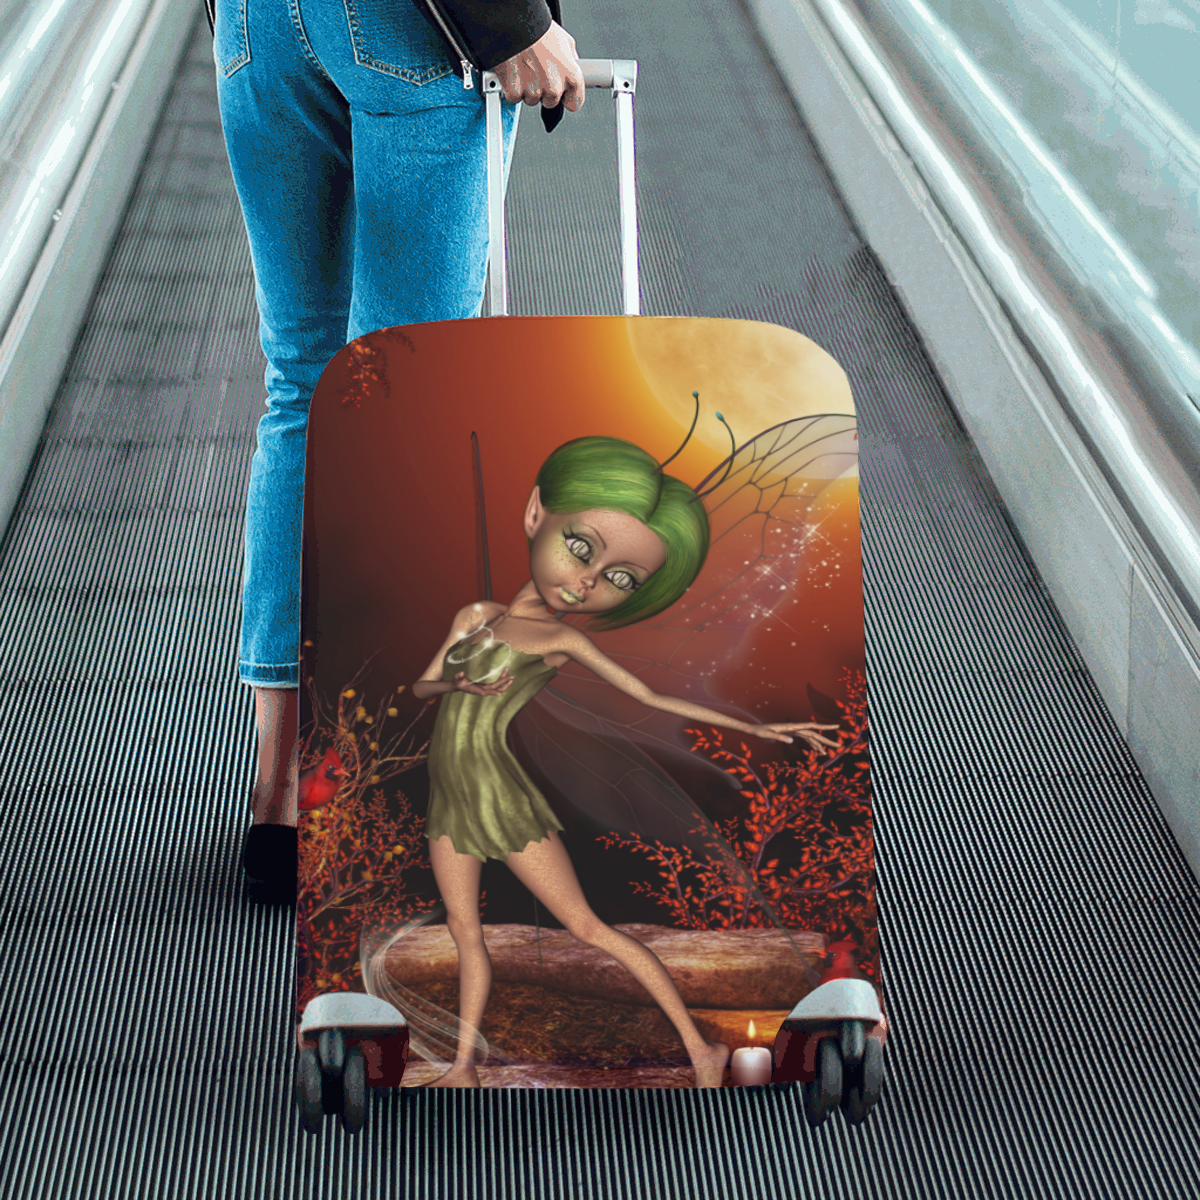 Cute little fairy Luggage Cover/Large 26"-28"